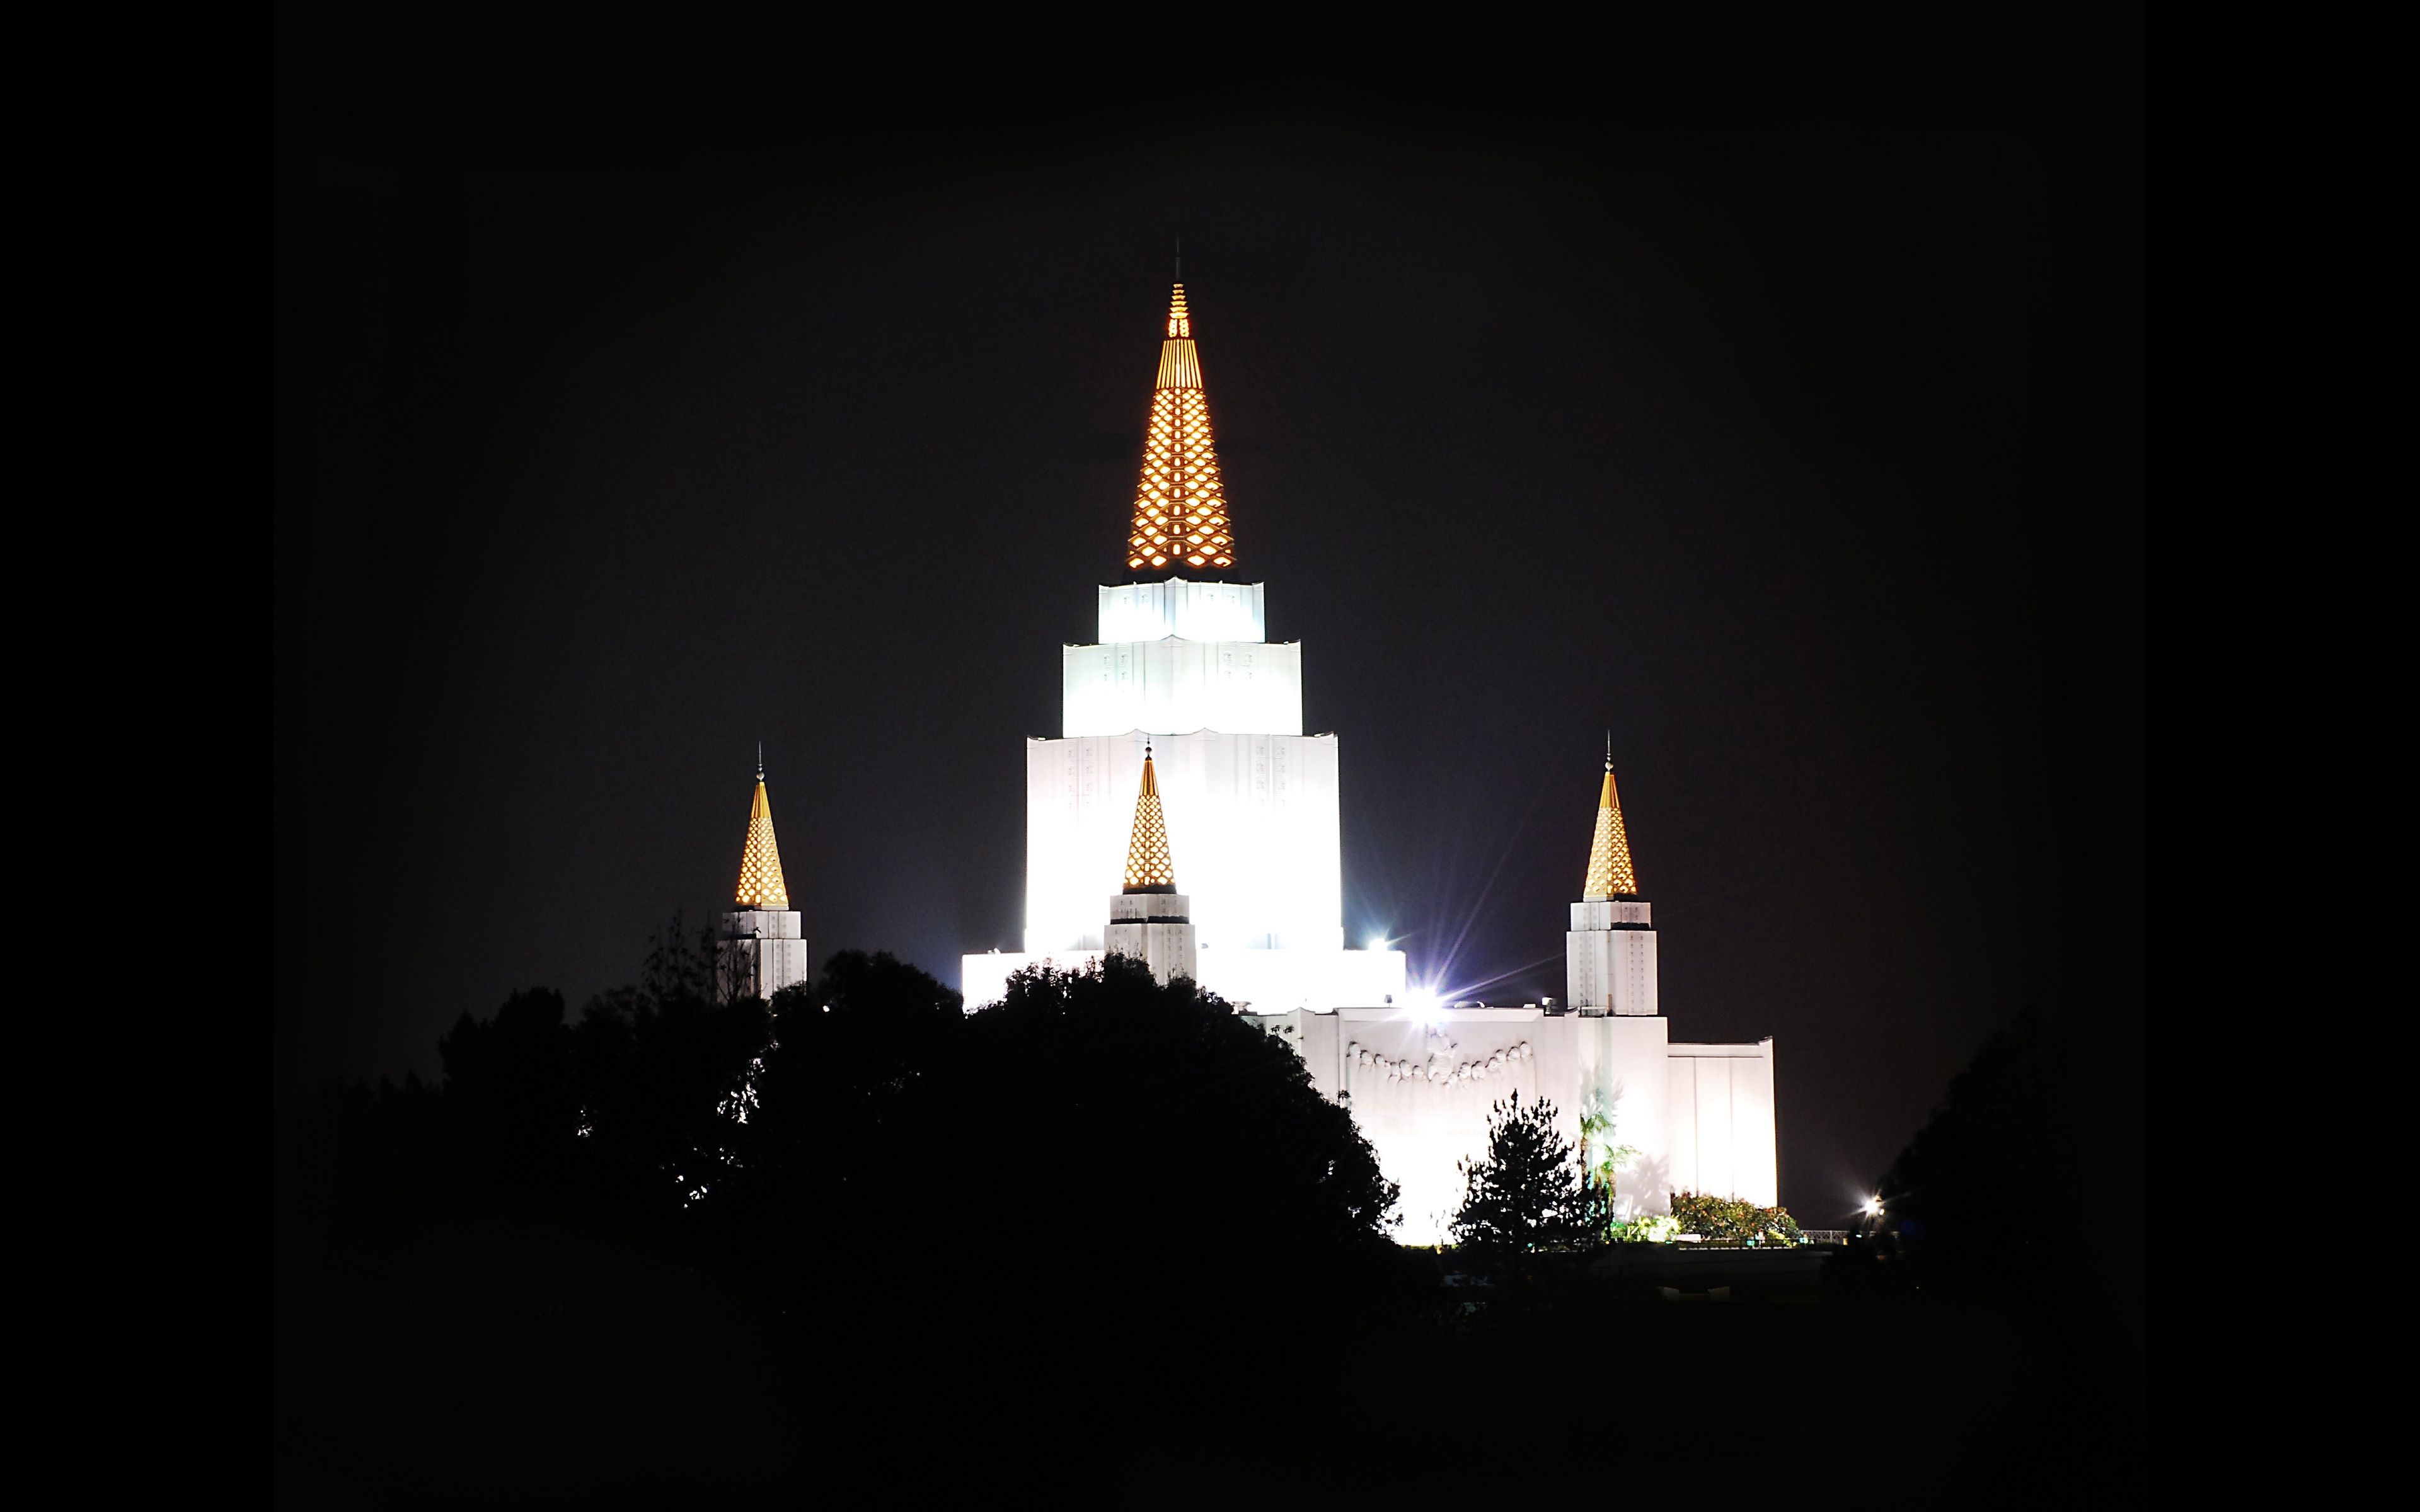 The Oakland California Temple in the evening, including scenery.